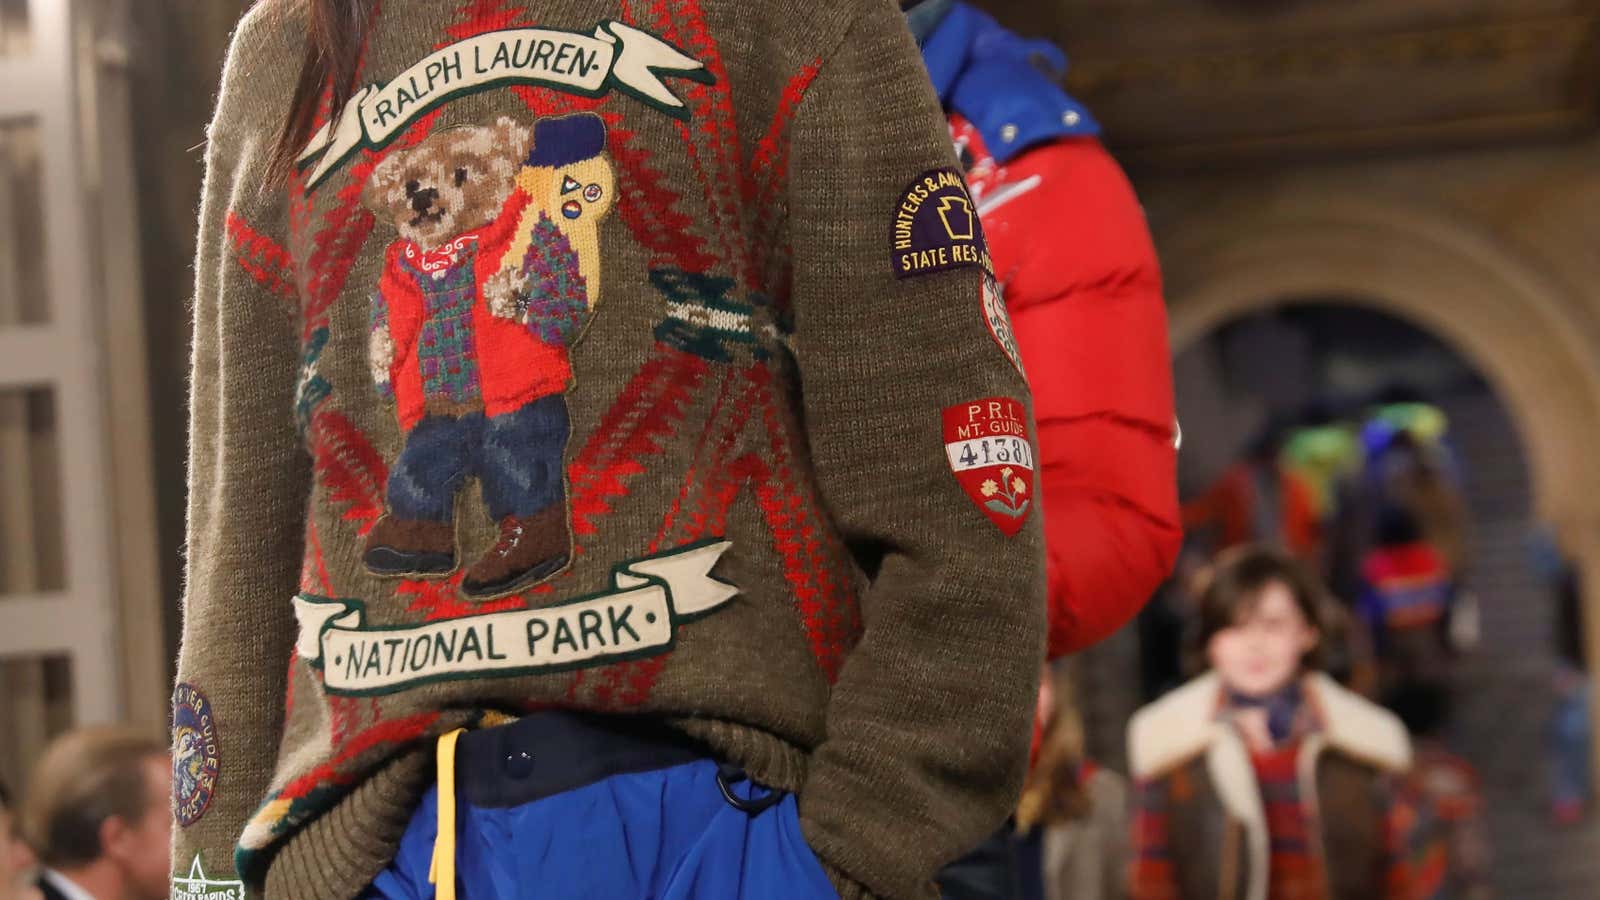 Ralph Lauren says its Palace collab and Winter Stadium collections